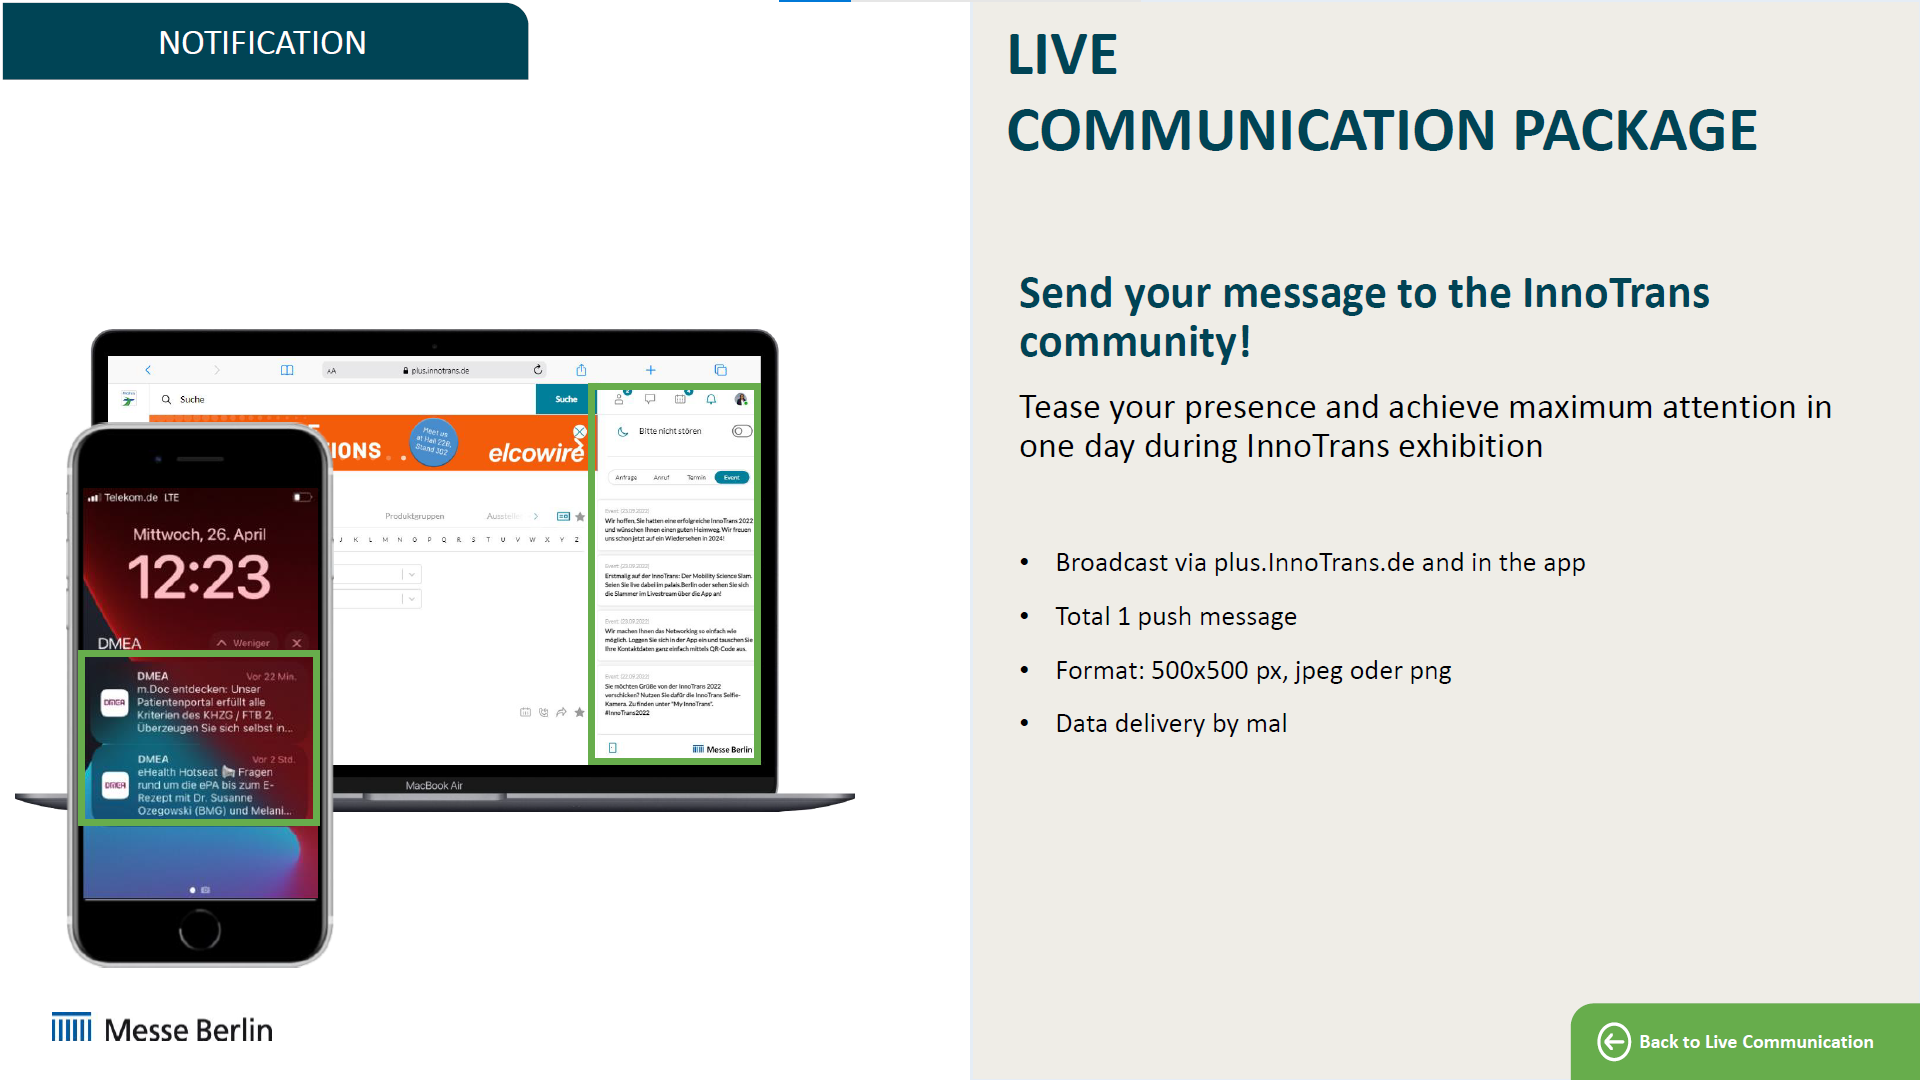 LIVE COMMUNICATION PACKAGE